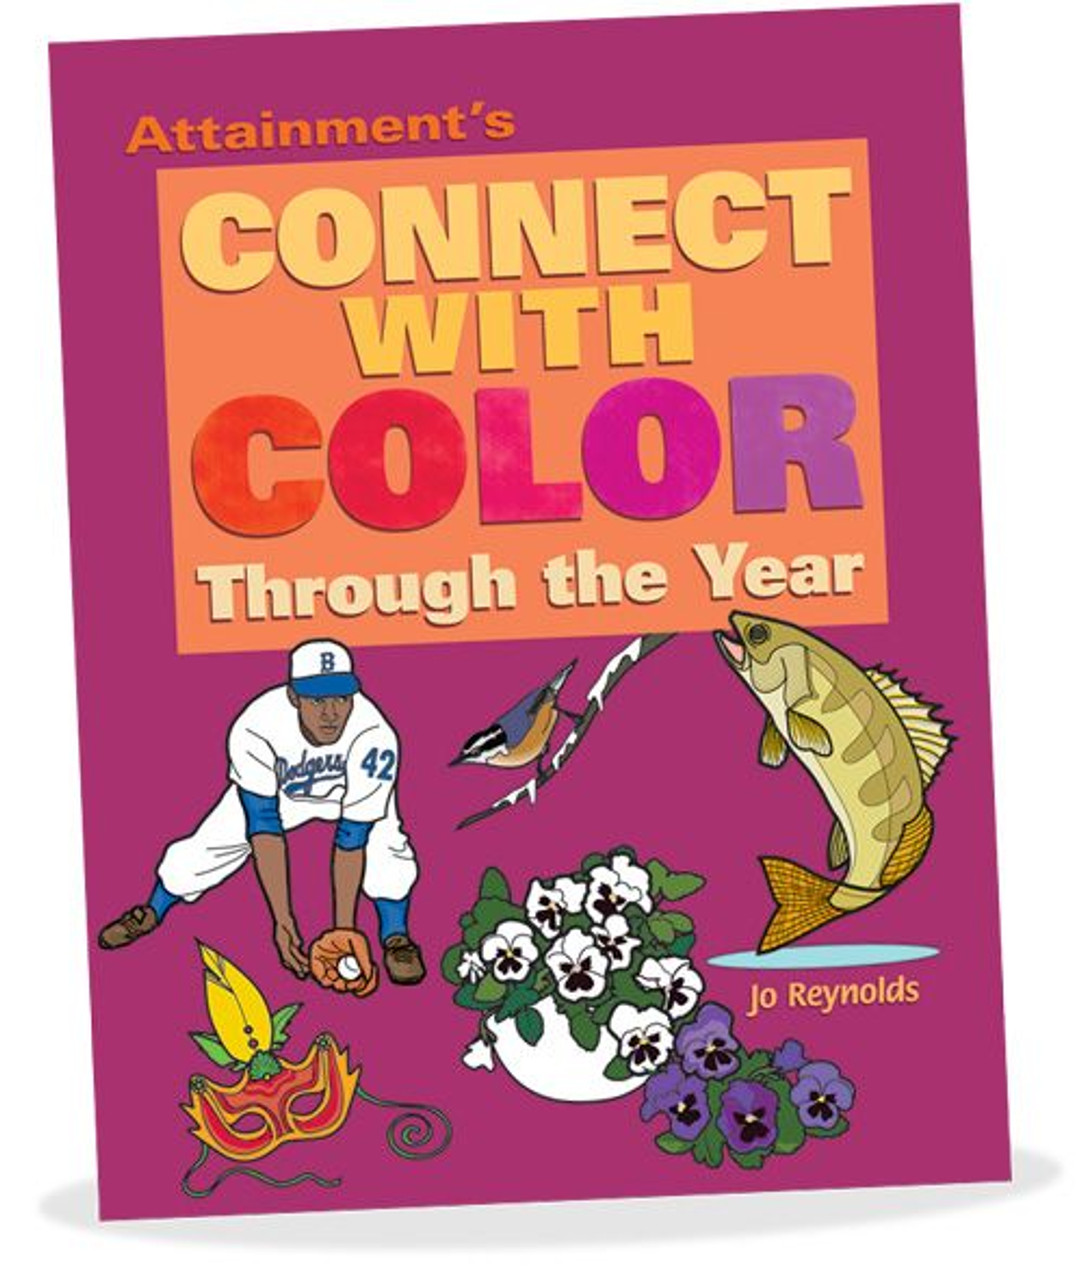 Coloring Books for Seniors: Including Books for Dementia and